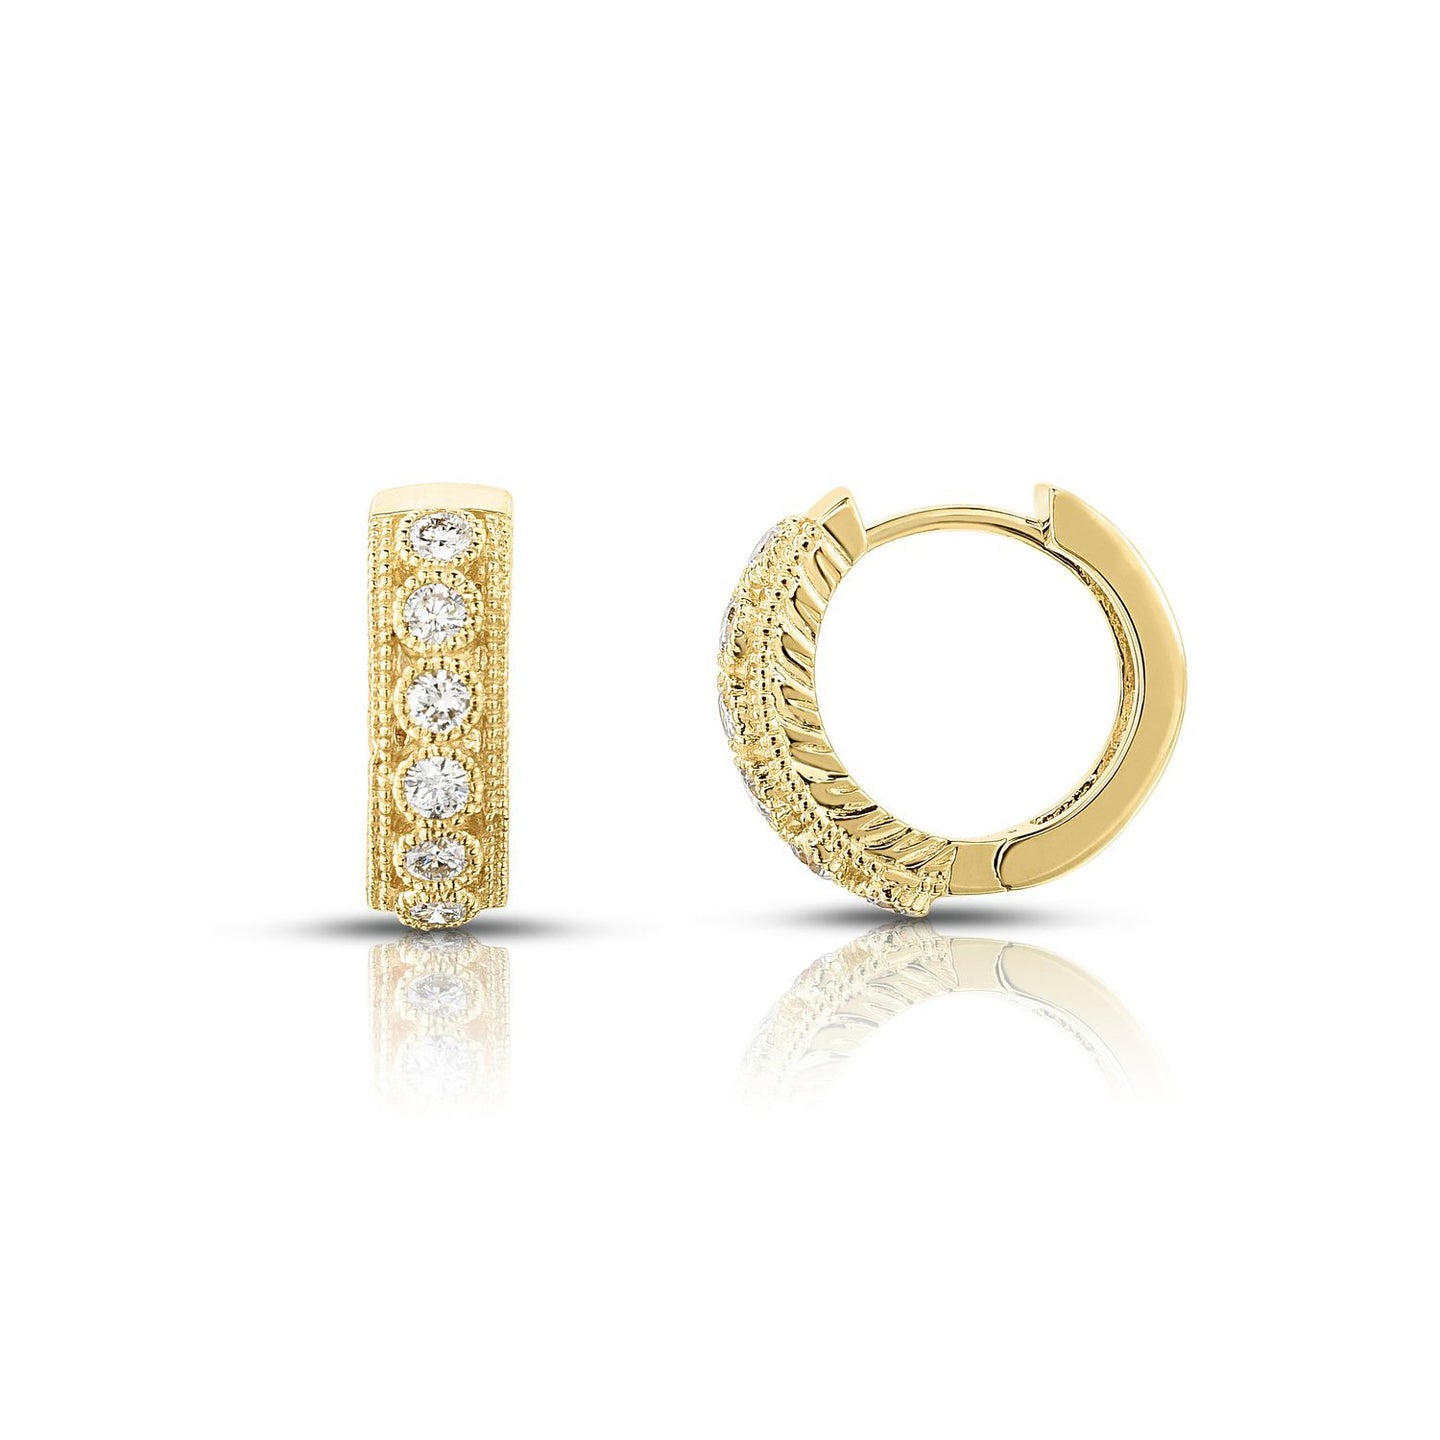 Sabel Collection 14K Yellow Gold Round Diamond Hoop Earrings